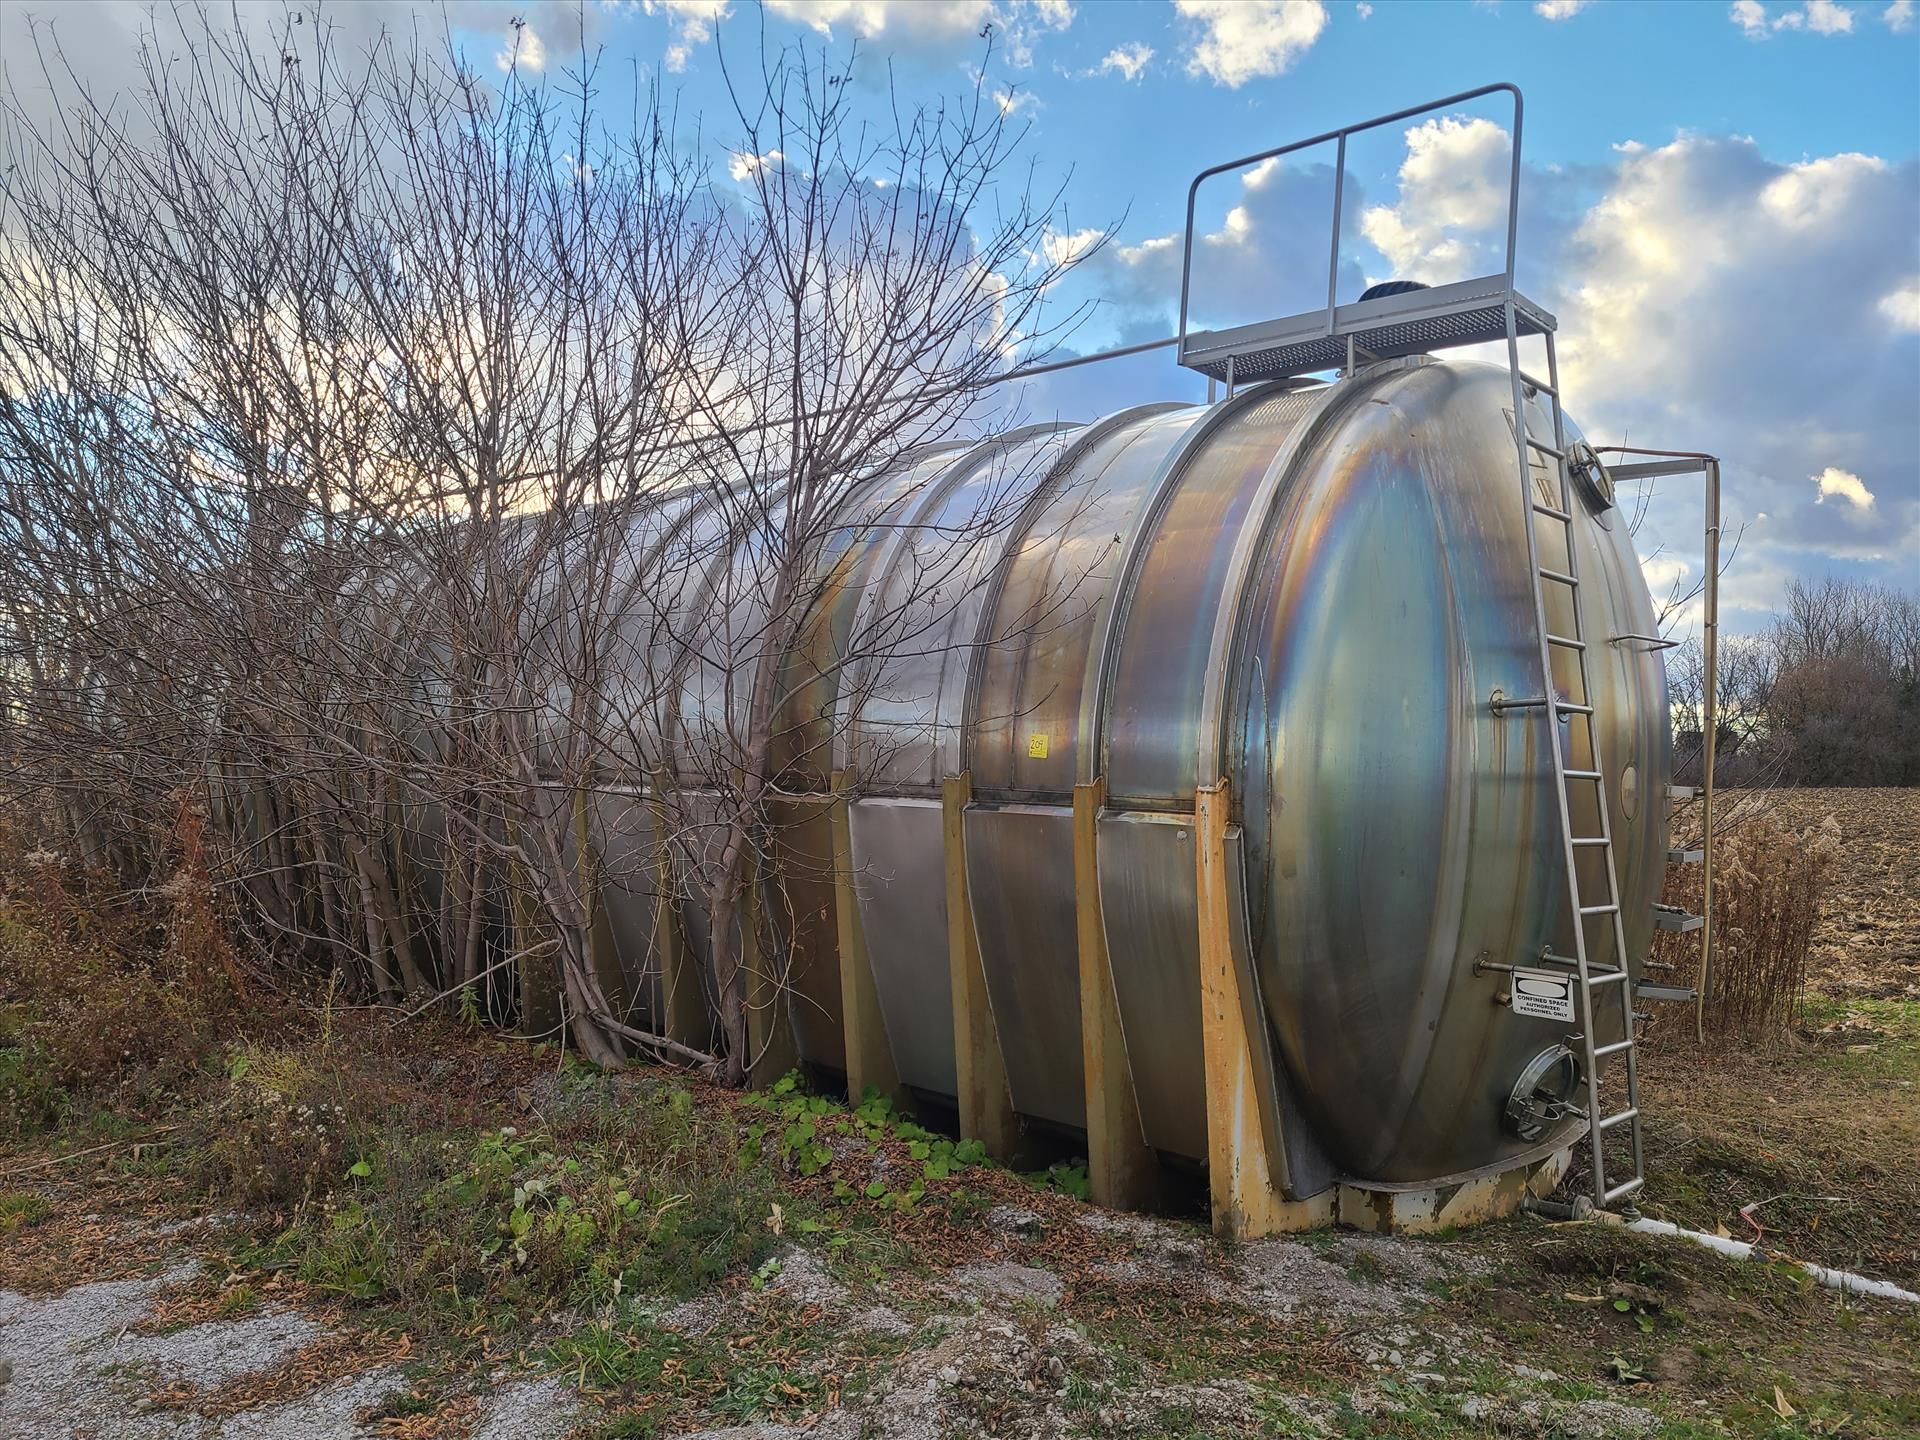 L'Hoir vertical tank, stainless steel, approx. 52 ft. long x 162 in. dia., x 14 ft. height, 46,670 g